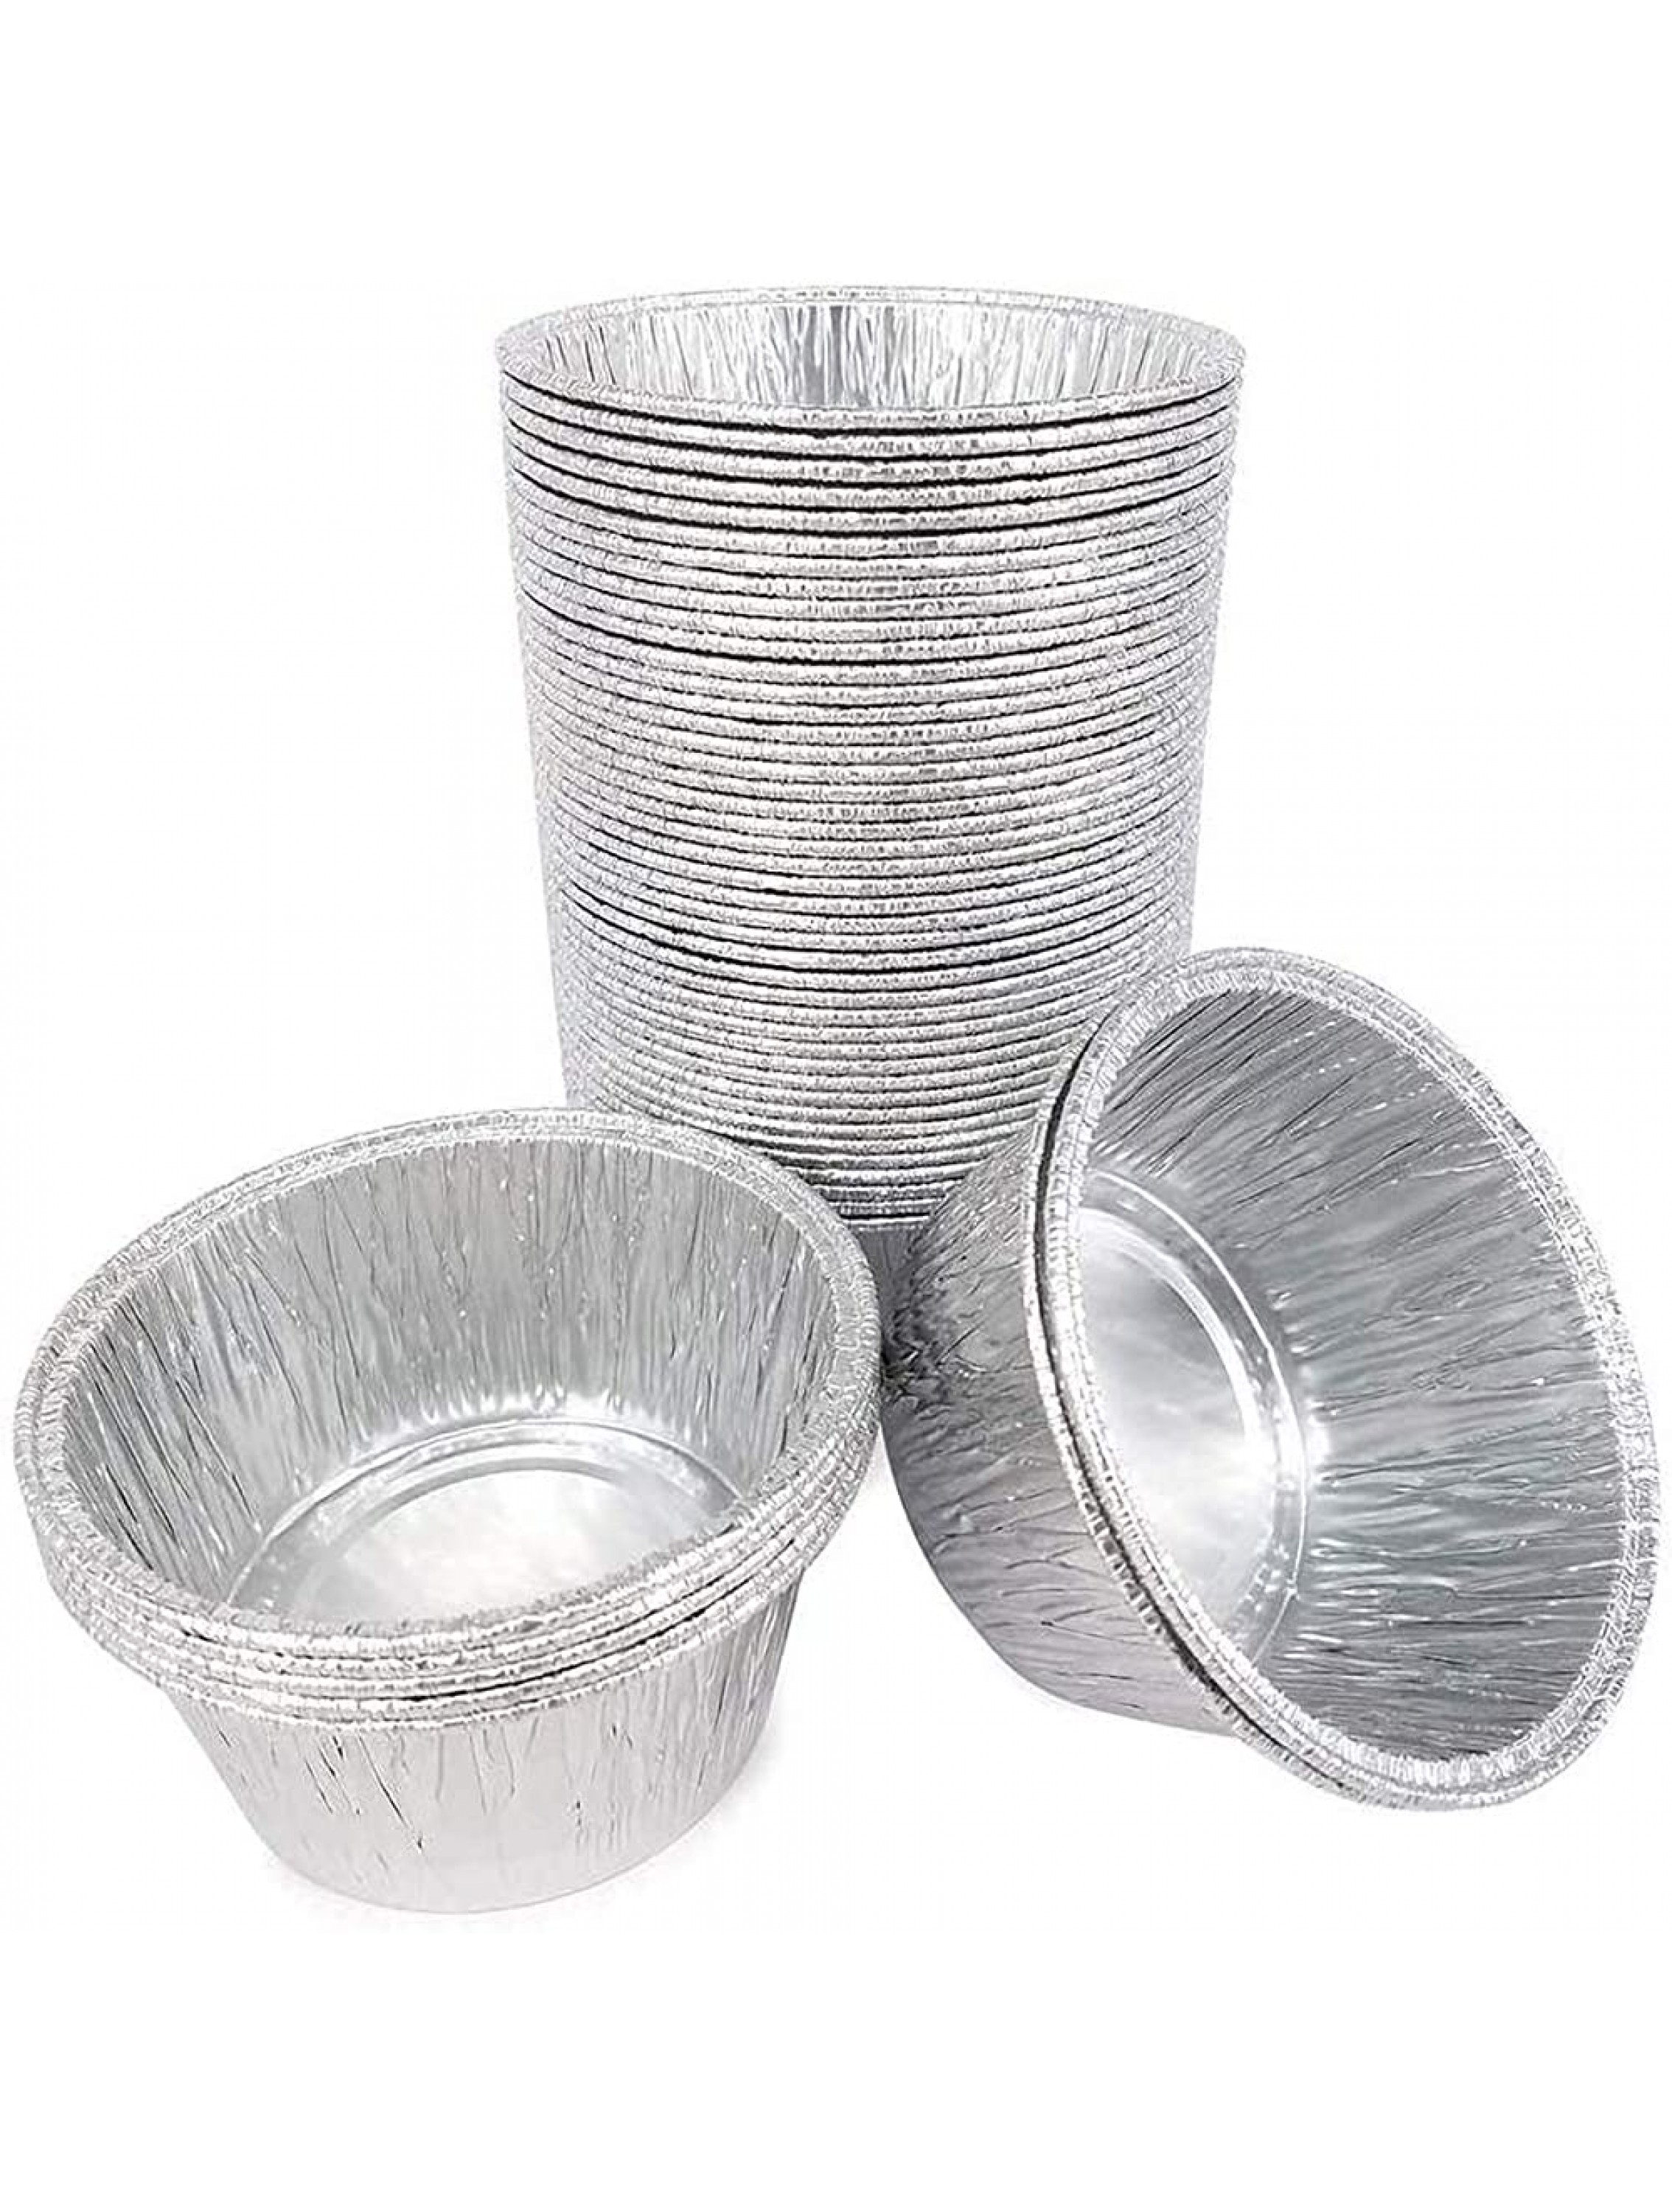 Disposable Round Aluminum Foil Trays Containers Cake Cup Mini Tart Pans 3.2x3.2x1.4 Kitchen Baking BBQBarbecues Desserts Make Food For Kids Heat Food At Family Dinner Friends Dinner Party Wedding - BQUKS73YD